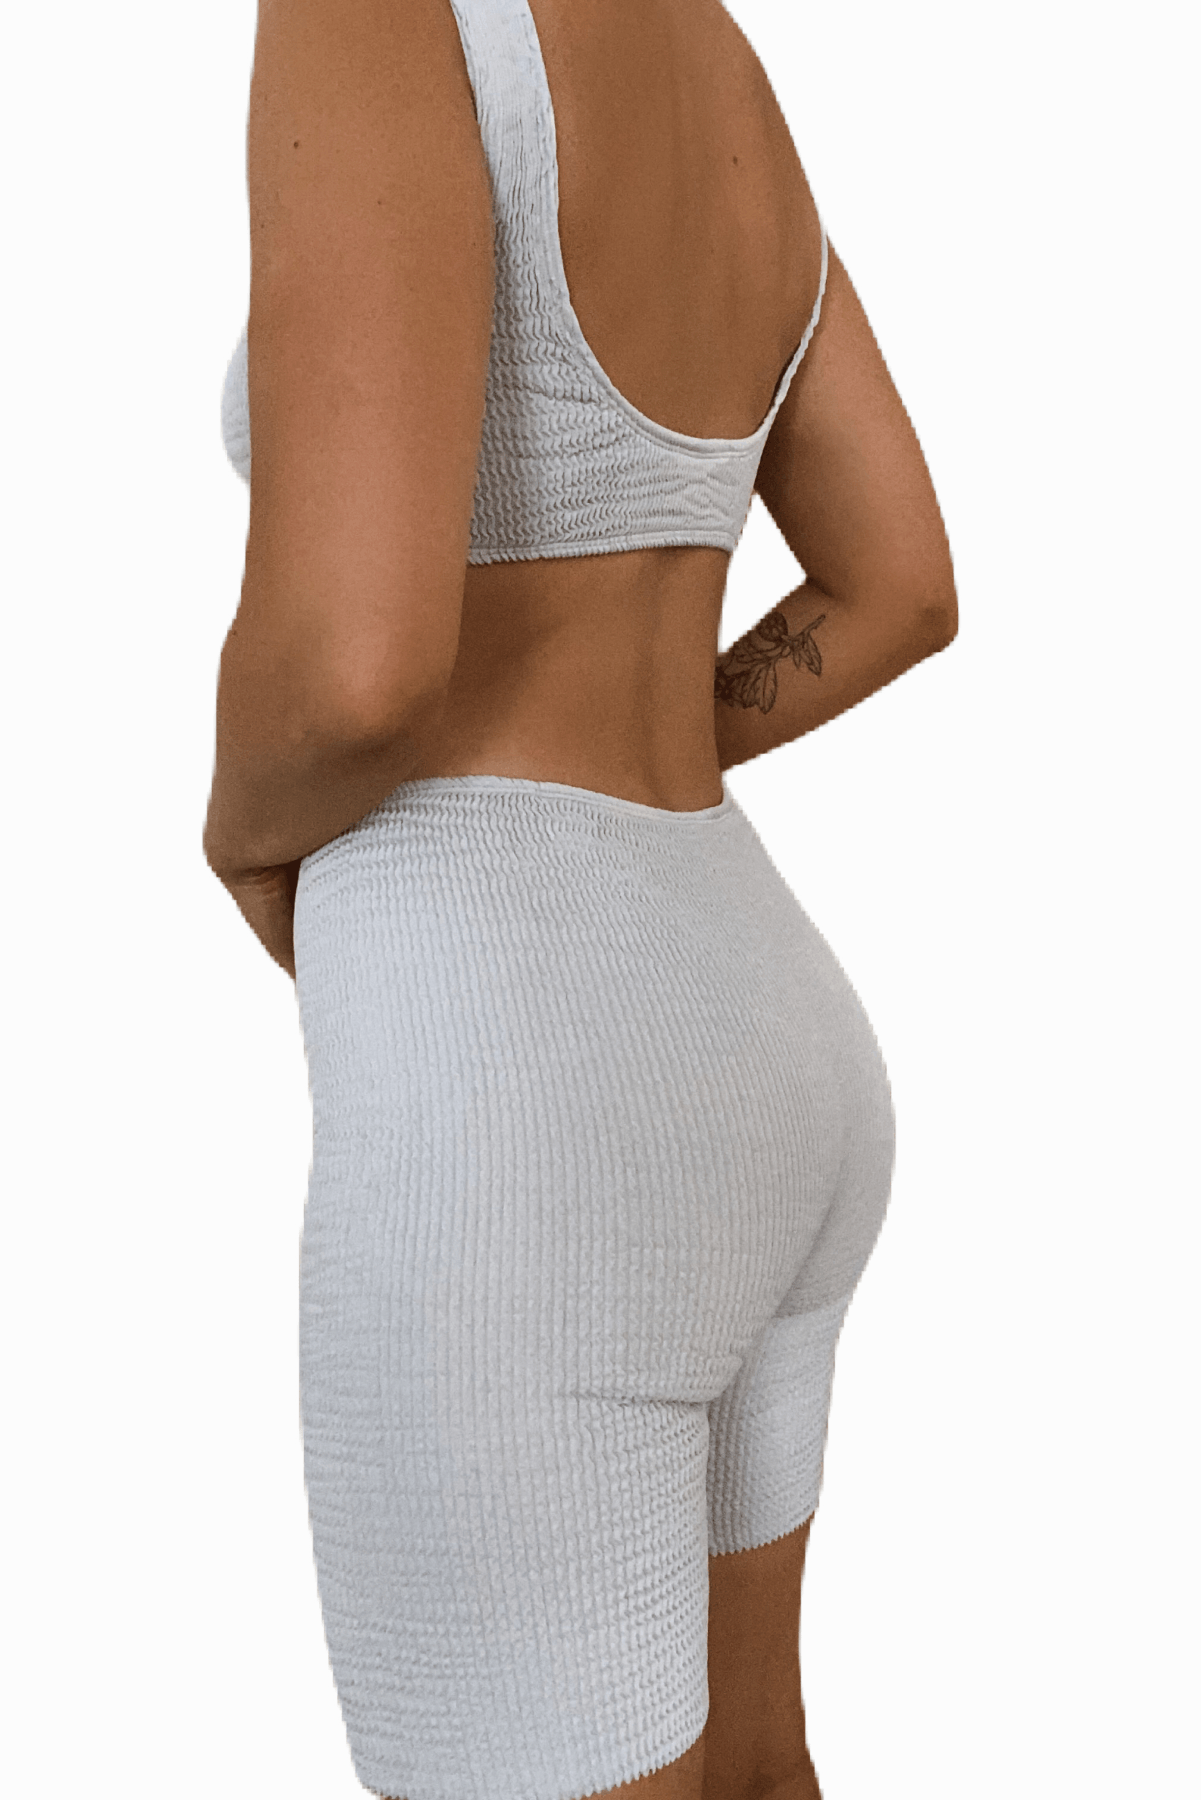 RPET Midnight High-Rise Pocket Legging - COUTONIC